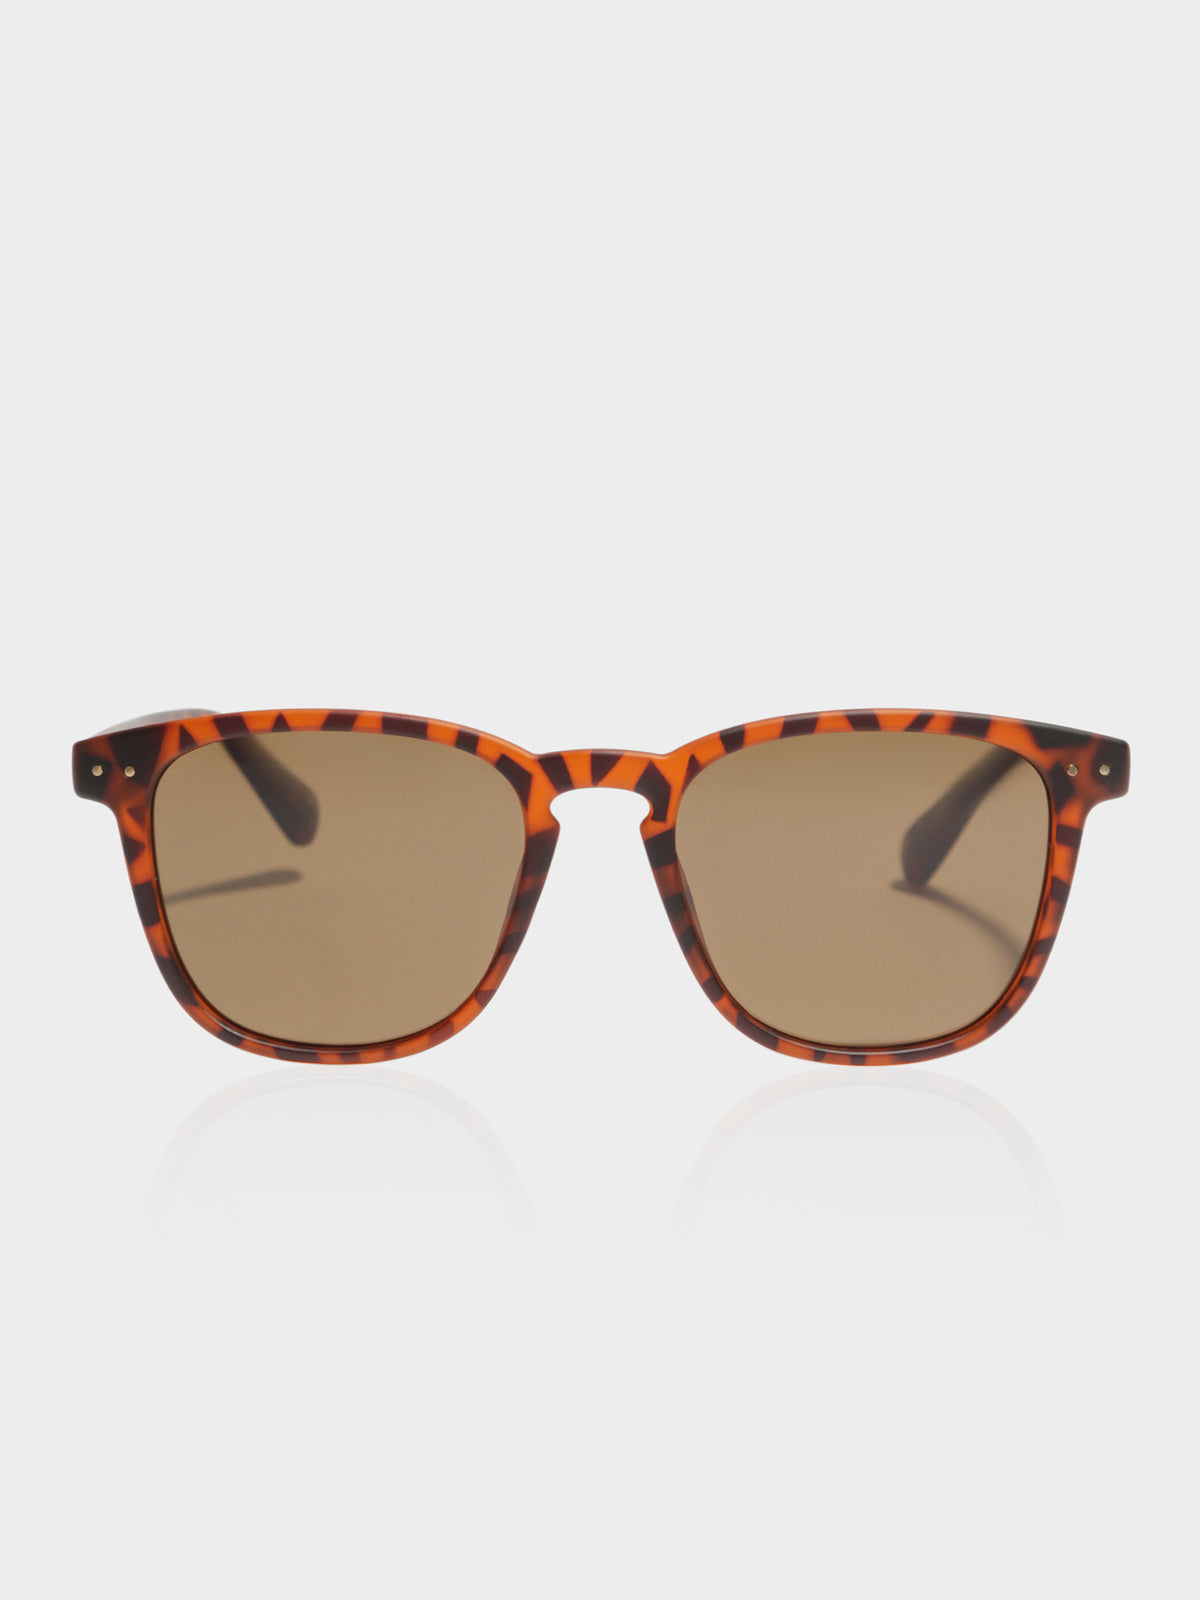 SYD Polarized Sunglasses in Tortoise Shell Brown